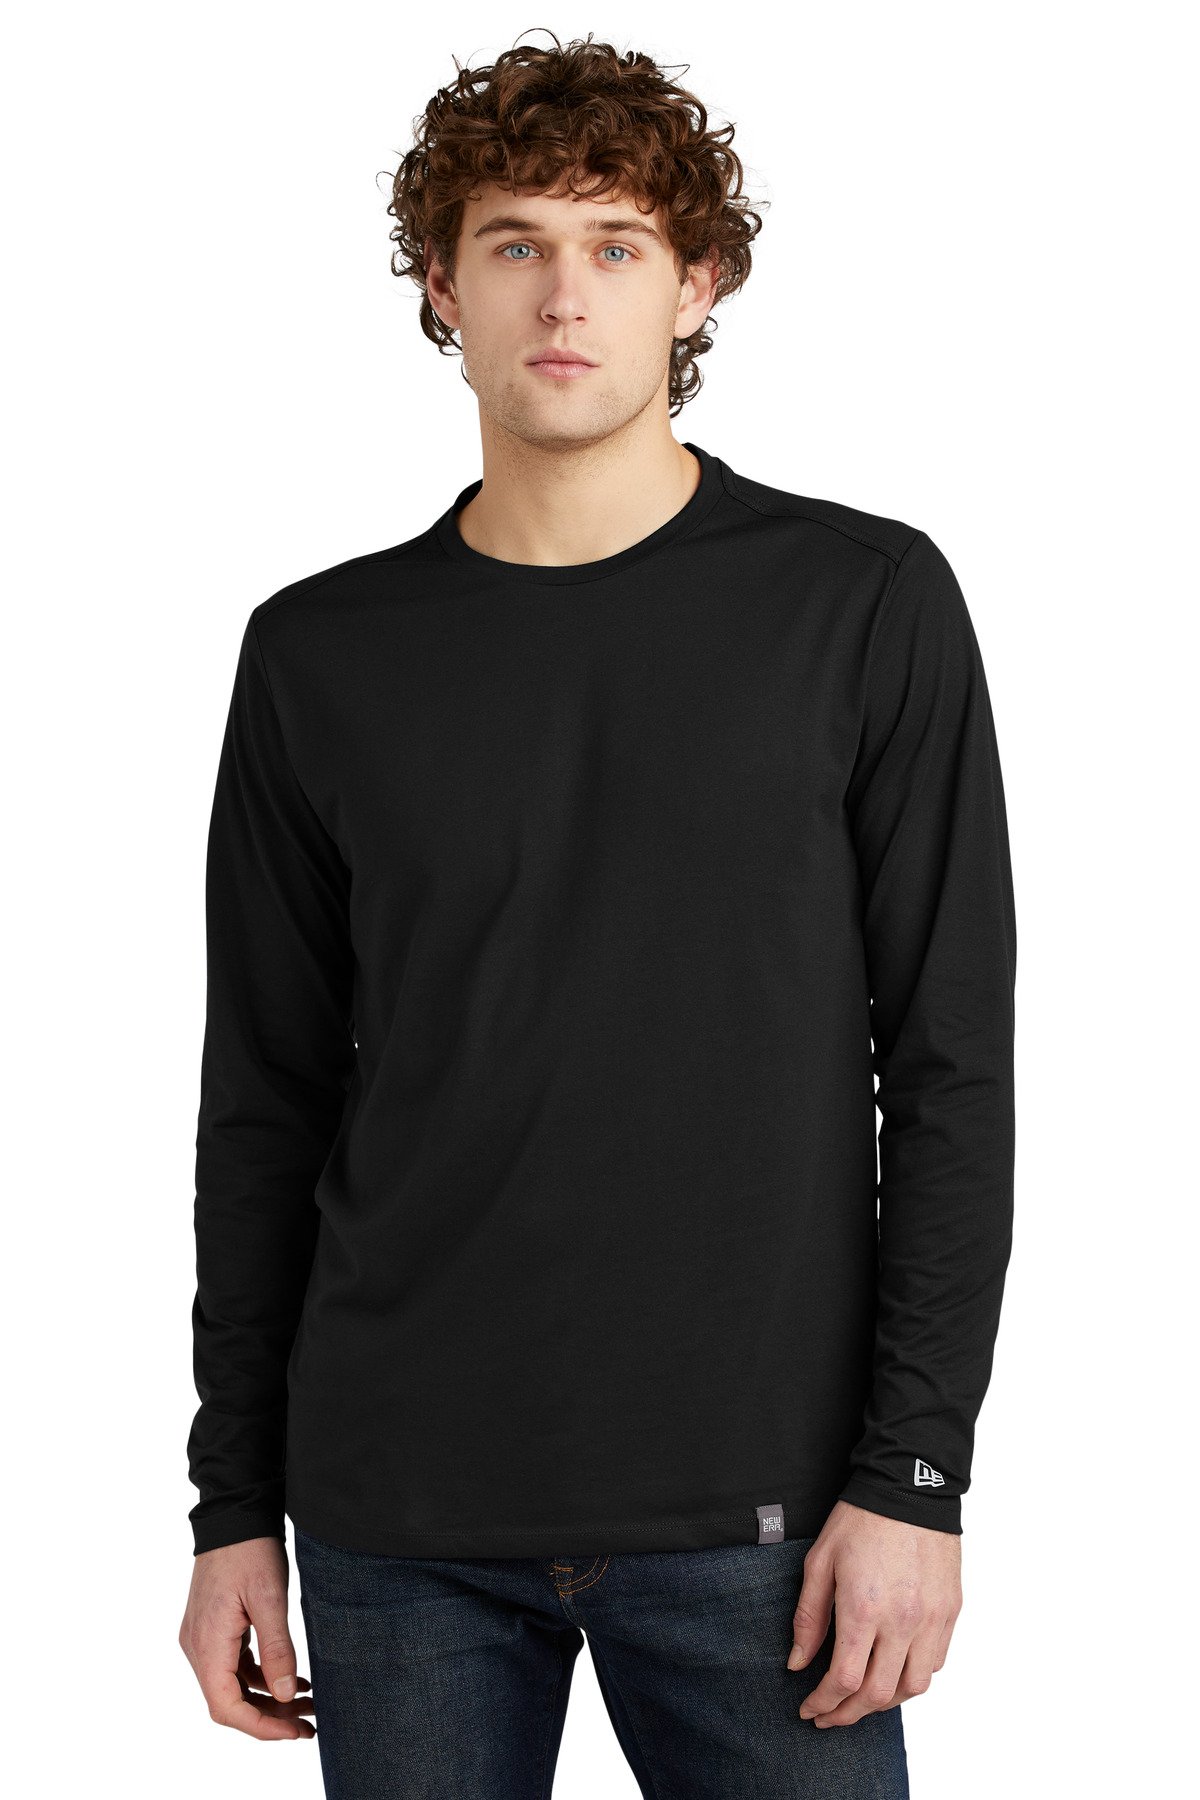 Front view of Heritage Blend Long Sleeve Crew Tee